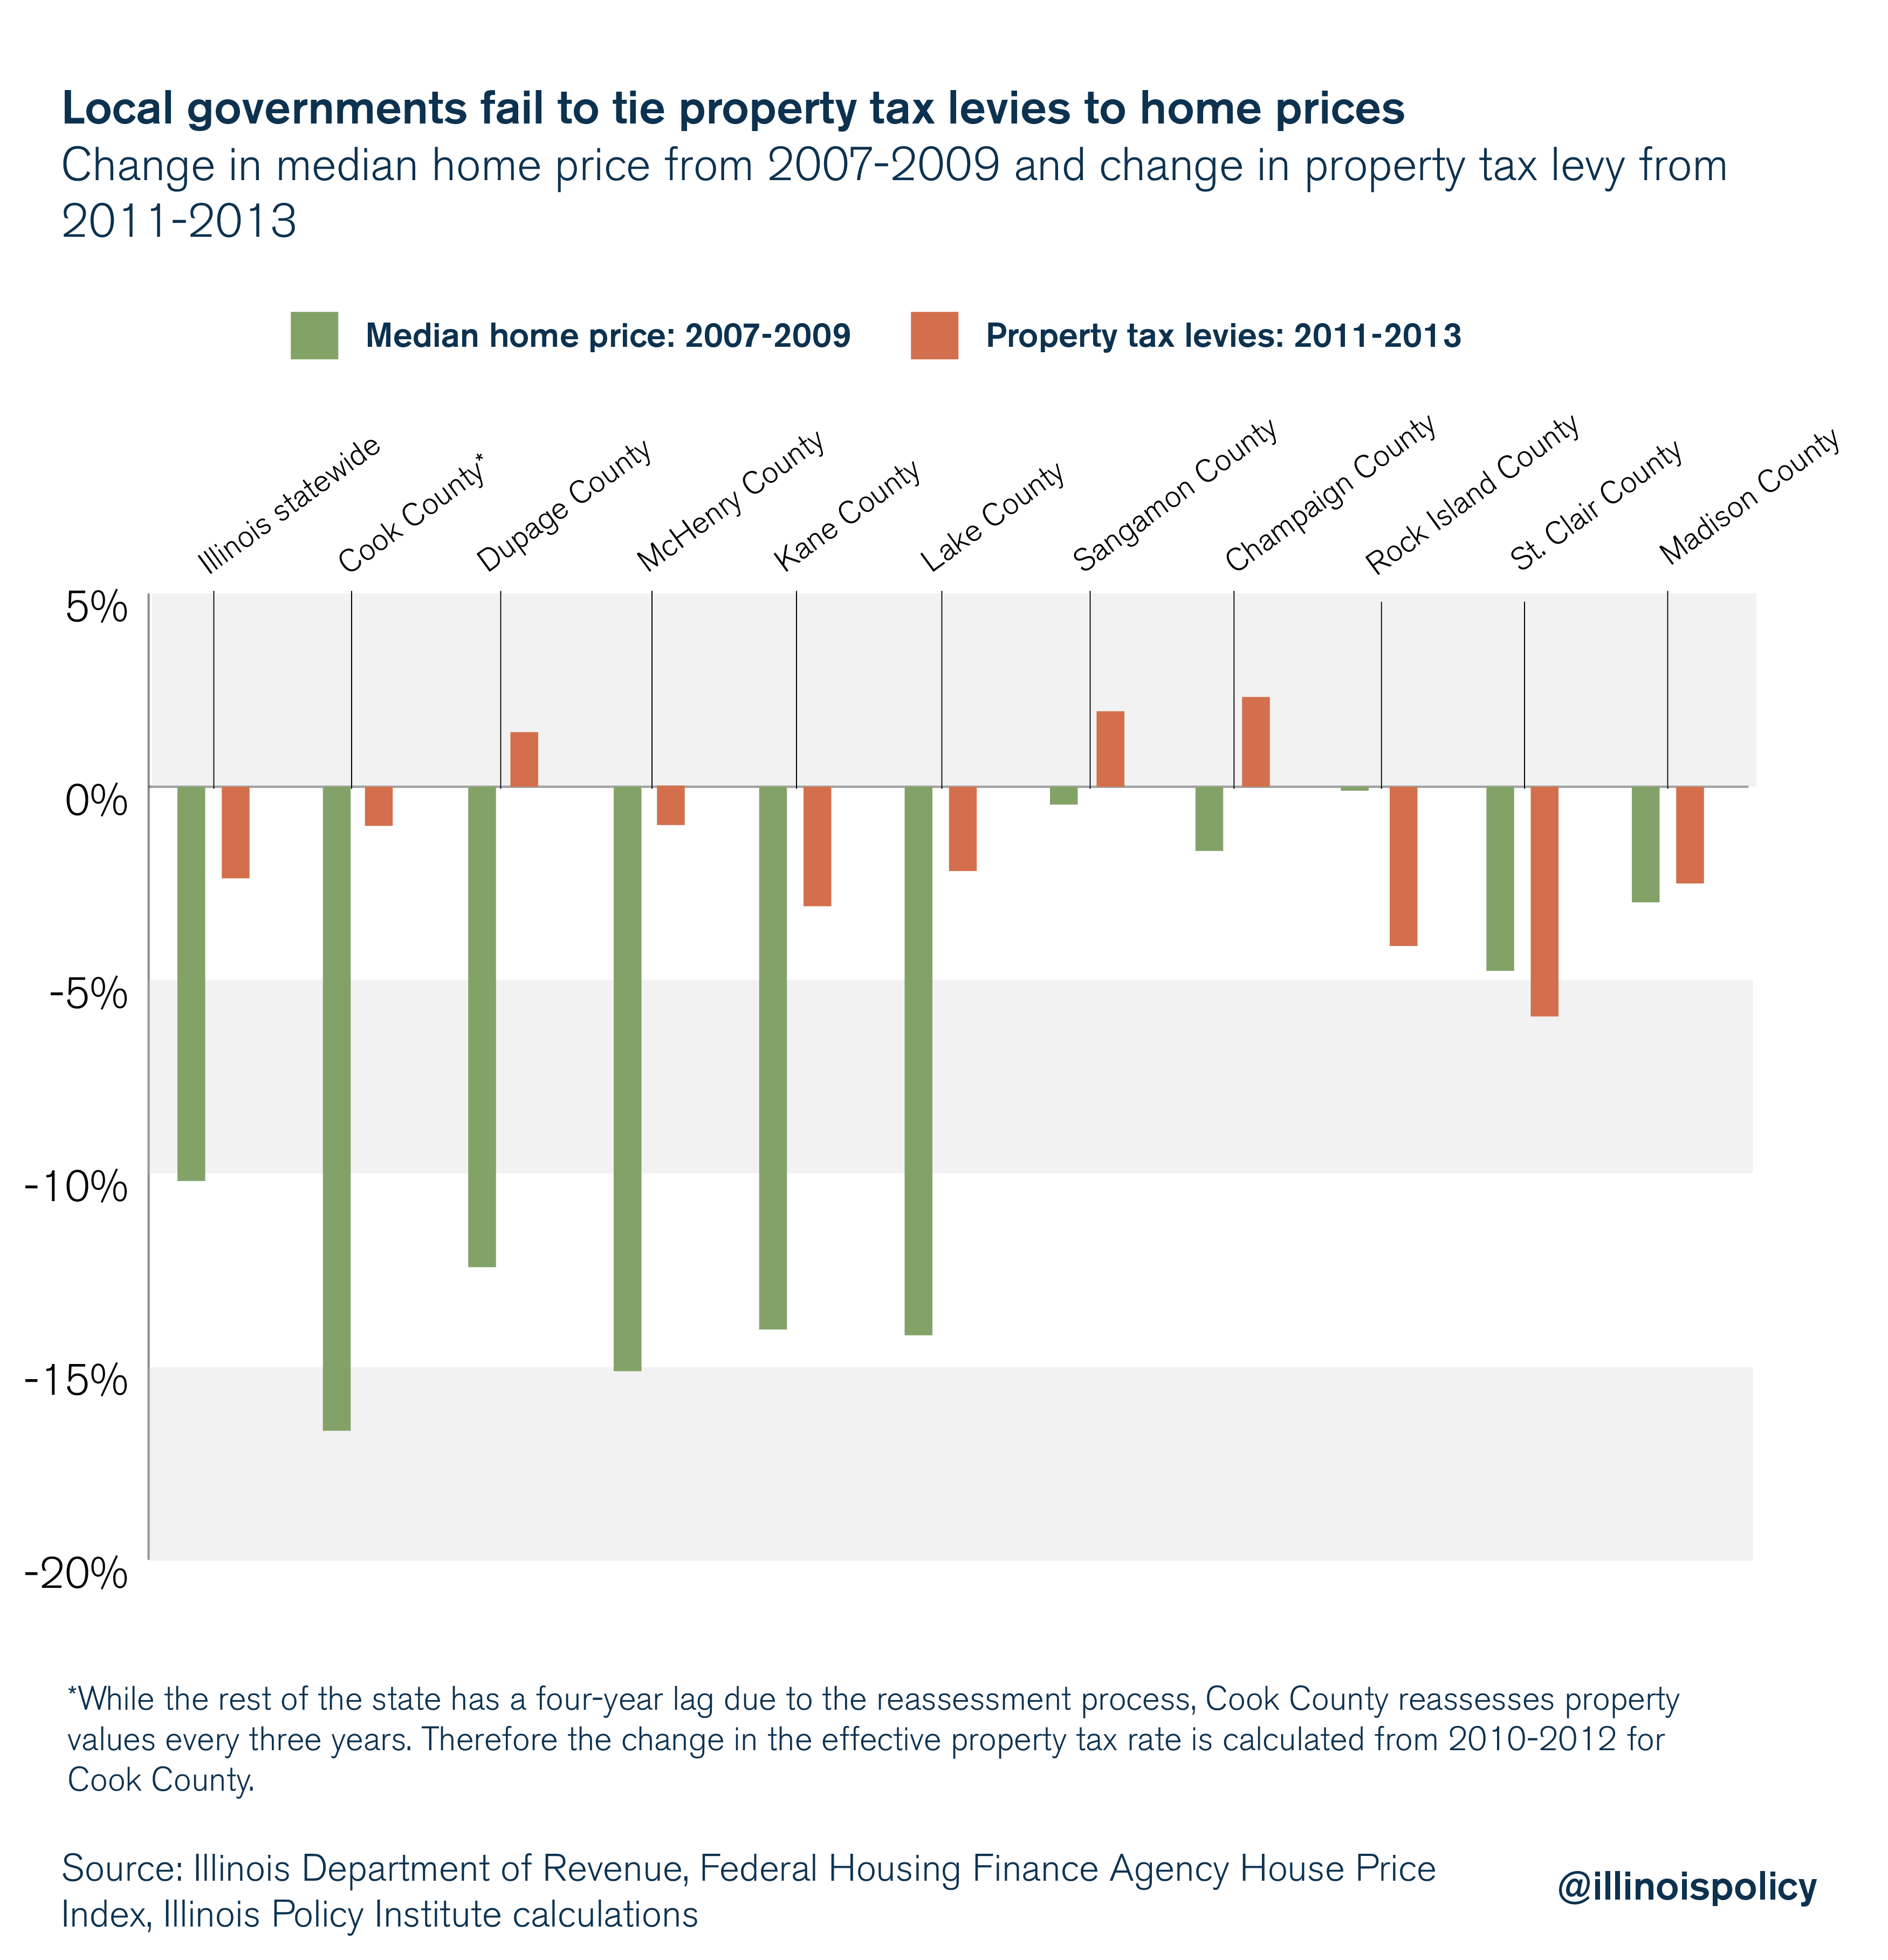 Local governments fail to tie property tax levies to home prices